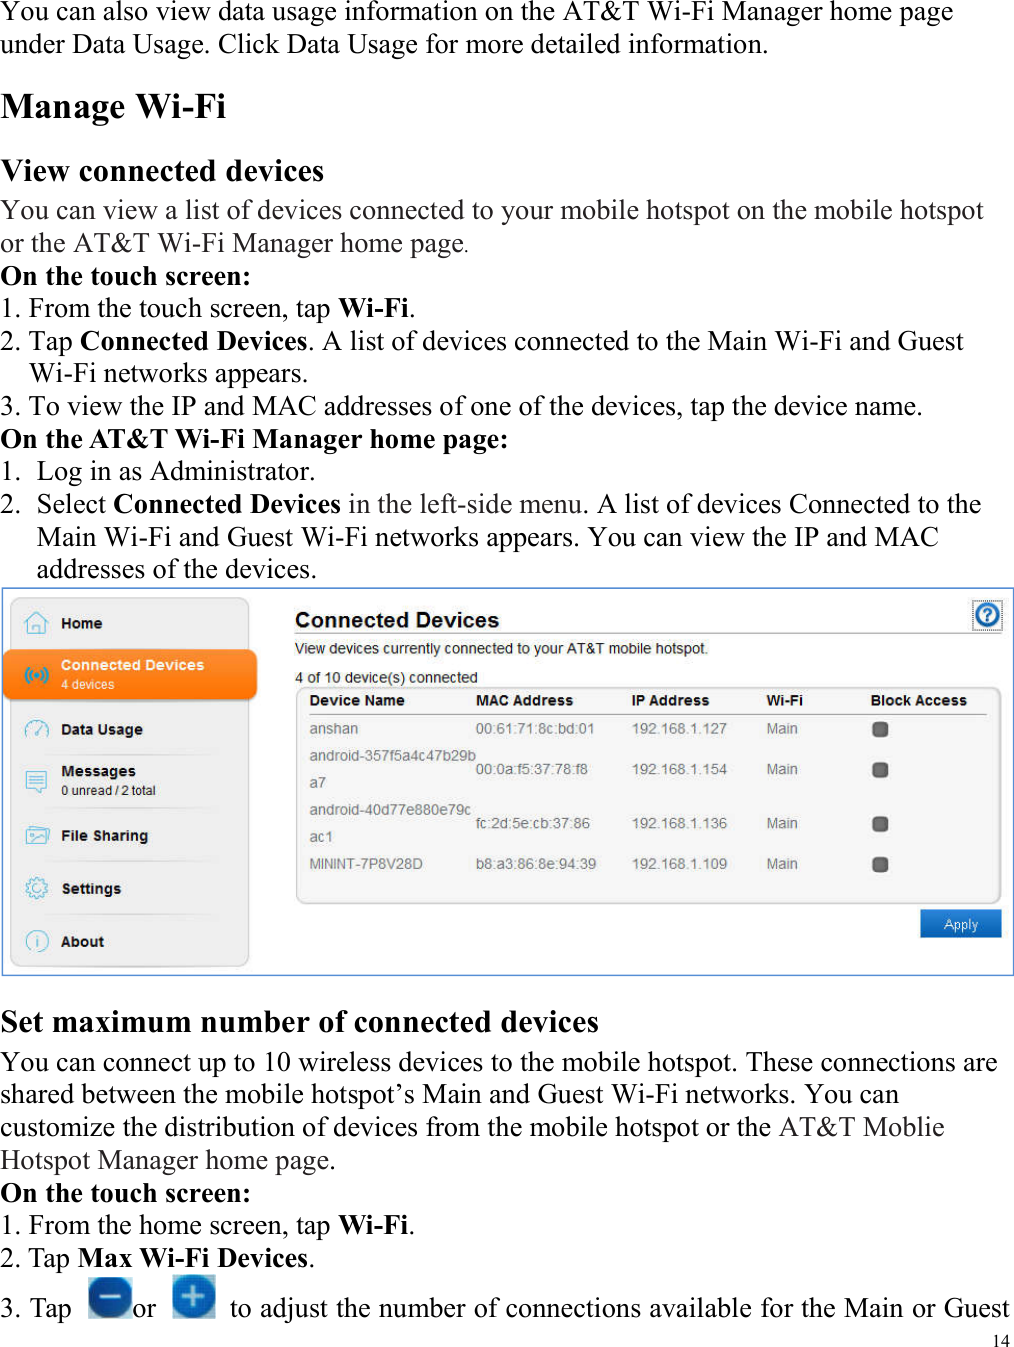 14  You can also view data usage information on the AT&amp;T Wi-Fi Manager home page under Data Usage. Click Data Usage for more detailed information. Manage Wi-Fi View connected devices   You can view a list of devices connected to your mobile hotspot on the mobile hotspot or the AT&amp;T Wi-Fi Manager home page. On the touch screen:   1. From the touch screen, tap Wi-Fi. 2. Tap Connected Devices. A list of devices connected to the Main Wi-Fi and Guest Wi-Fi networks appears. 3. To view the IP and MAC addresses of one of the devices, tap the device name. On the AT&amp;T Wi-Fi Manager home page: 1. Log in as Administrator.   2. Select Connected Devices in the left-side menu. A list of devices Connected to the Main Wi-Fi and Guest Wi-Fi networks appears. You can view the IP and MAC addresses of the devices.  Set maximum number of connected devices   You can connect up to 10 wireless devices to the mobile hotspot. These connections are shared between the mobile hotspot’s Main and Guest Wi-Fi networks. You can customize the distribution of devices from the mobile hotspot or the AT&amp;T Moblie Hotspot Manager home page.   On the touch screen:   1. From the home screen, tap Wi-Fi.   2. Tap Max Wi-Fi Devices.   3. Tap  or    to adjust the number of connections available for the Main or Guest 